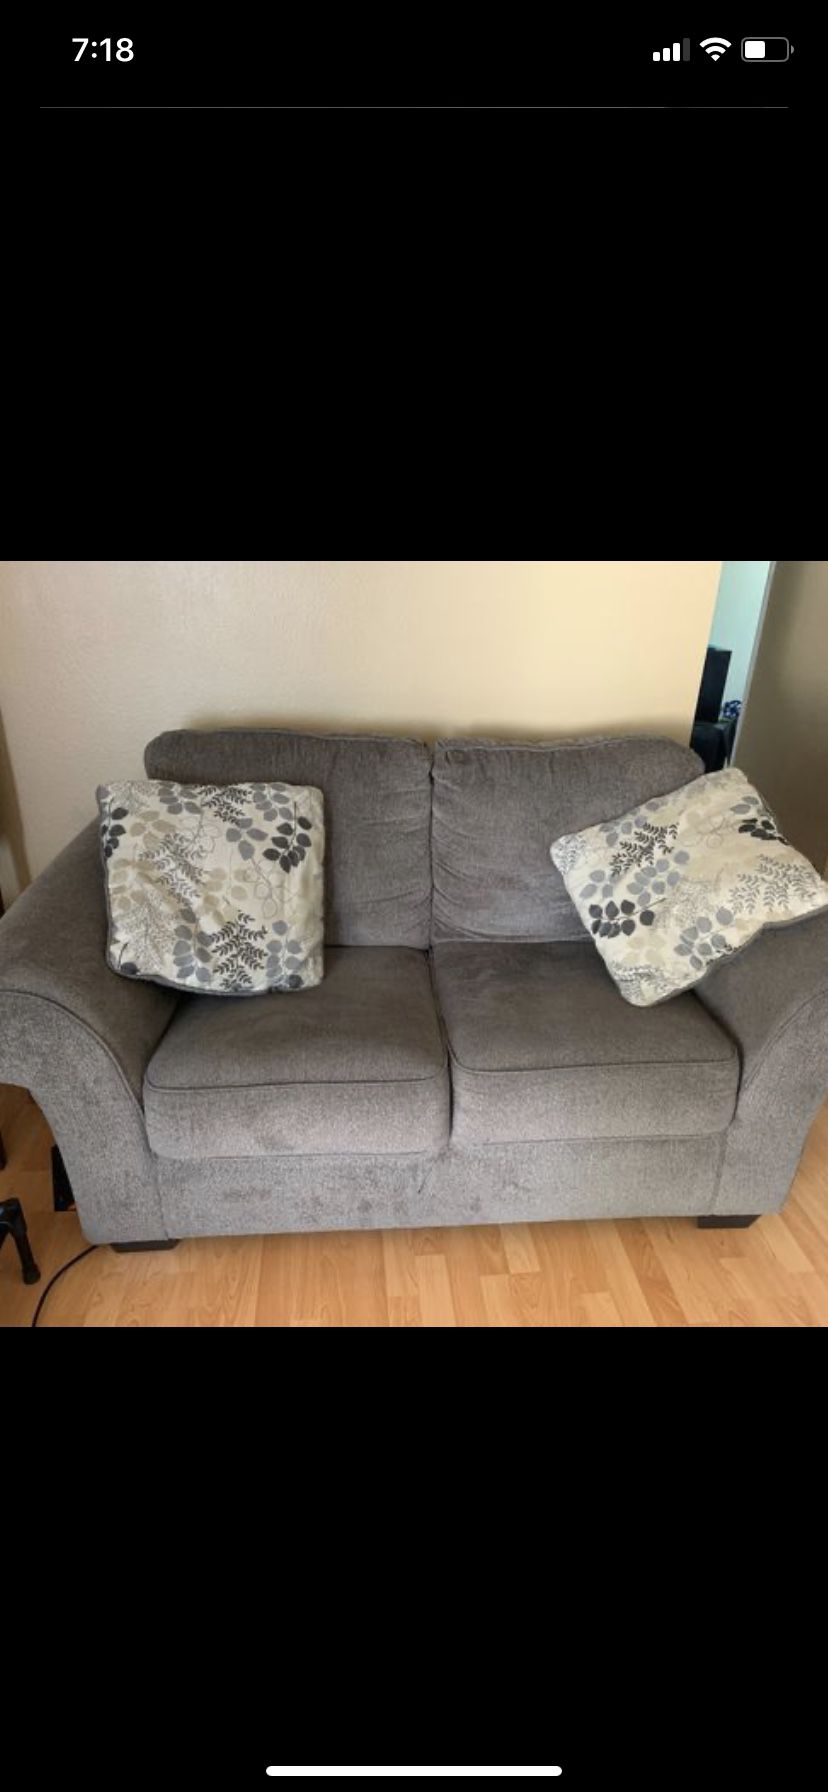 Two sofas. Moving sale